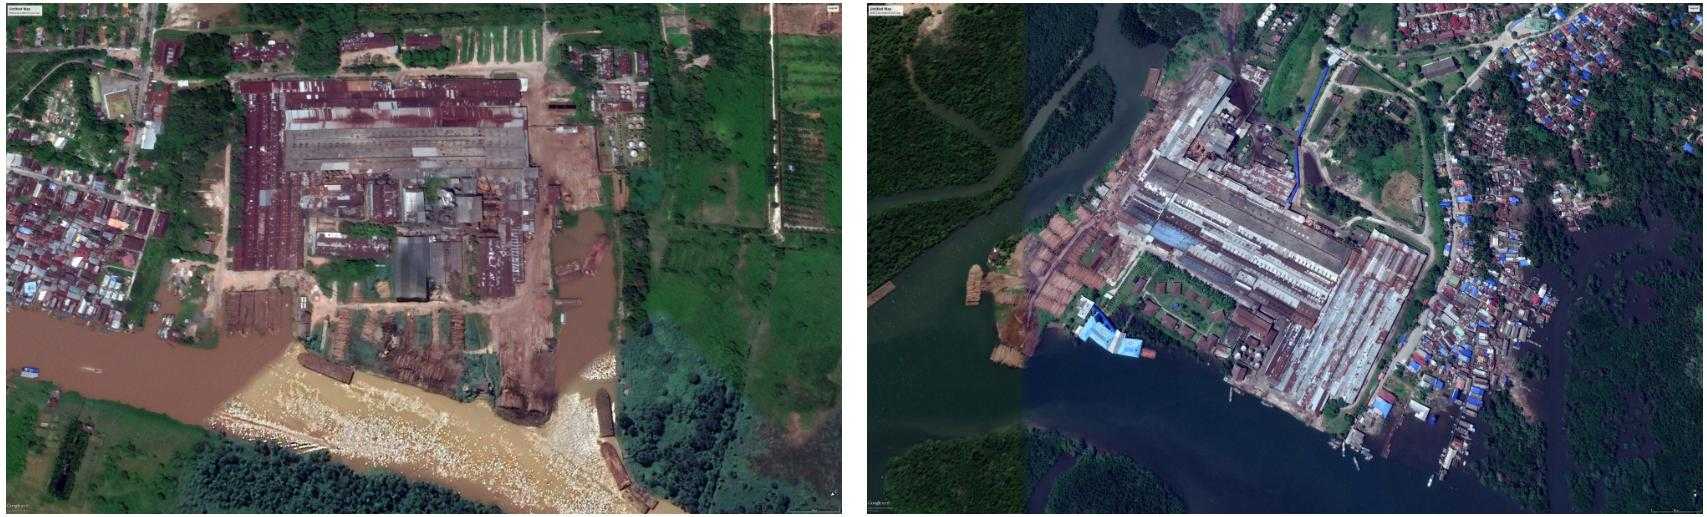 Satellite imagery of Korindo’s sawmills in Central Kalimantan (left) and East Kalimantan (right), both on the island of Borneo. Korindo is one of the largest plywood manufacturers in Indonesia, and in 2004 it accounted for an estimated 4% of global production.